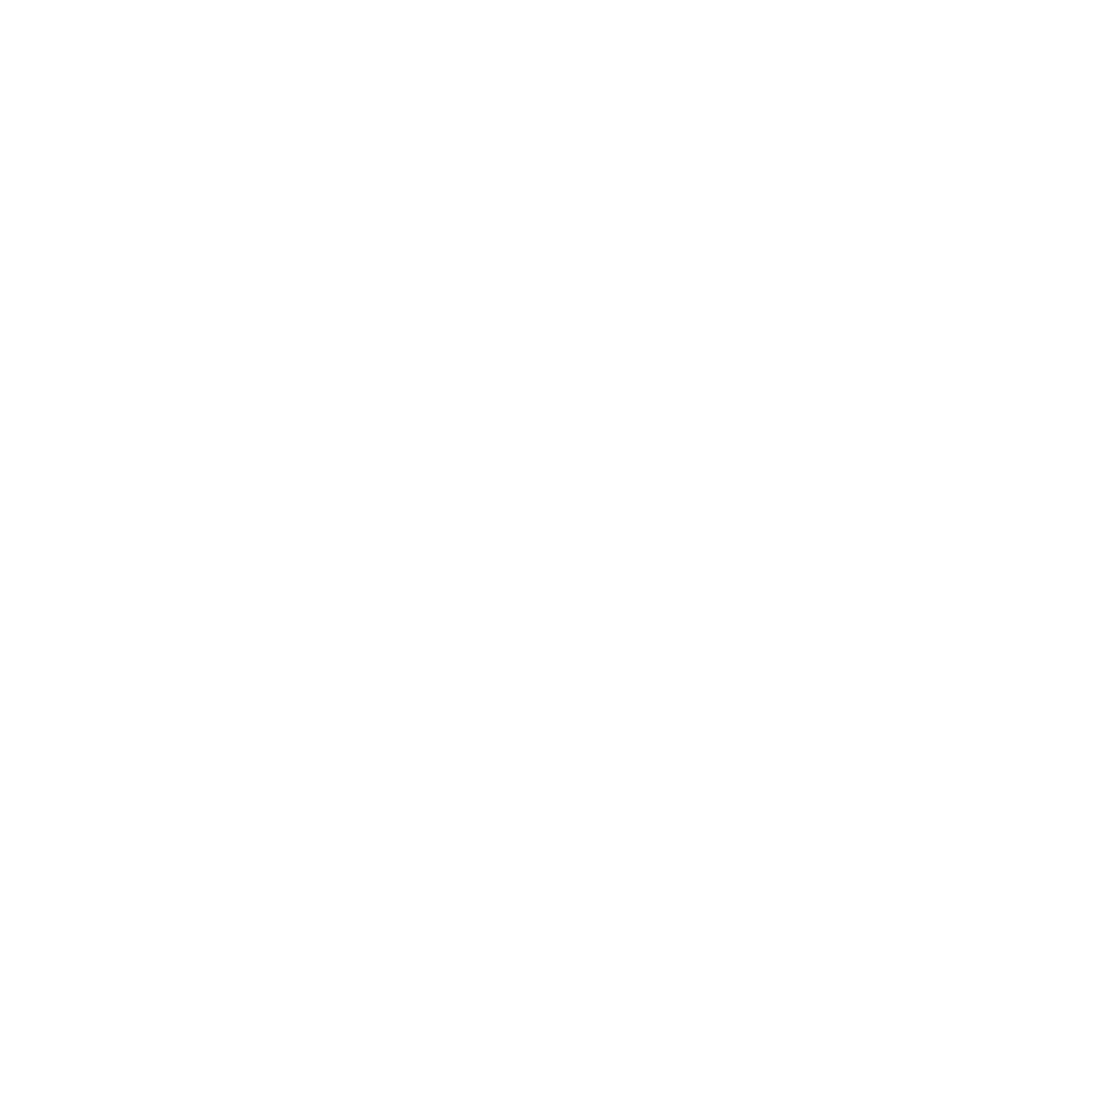 AgIntegrated partners with SkyWatch to bring Earth observation satellite data to the agriculture industry